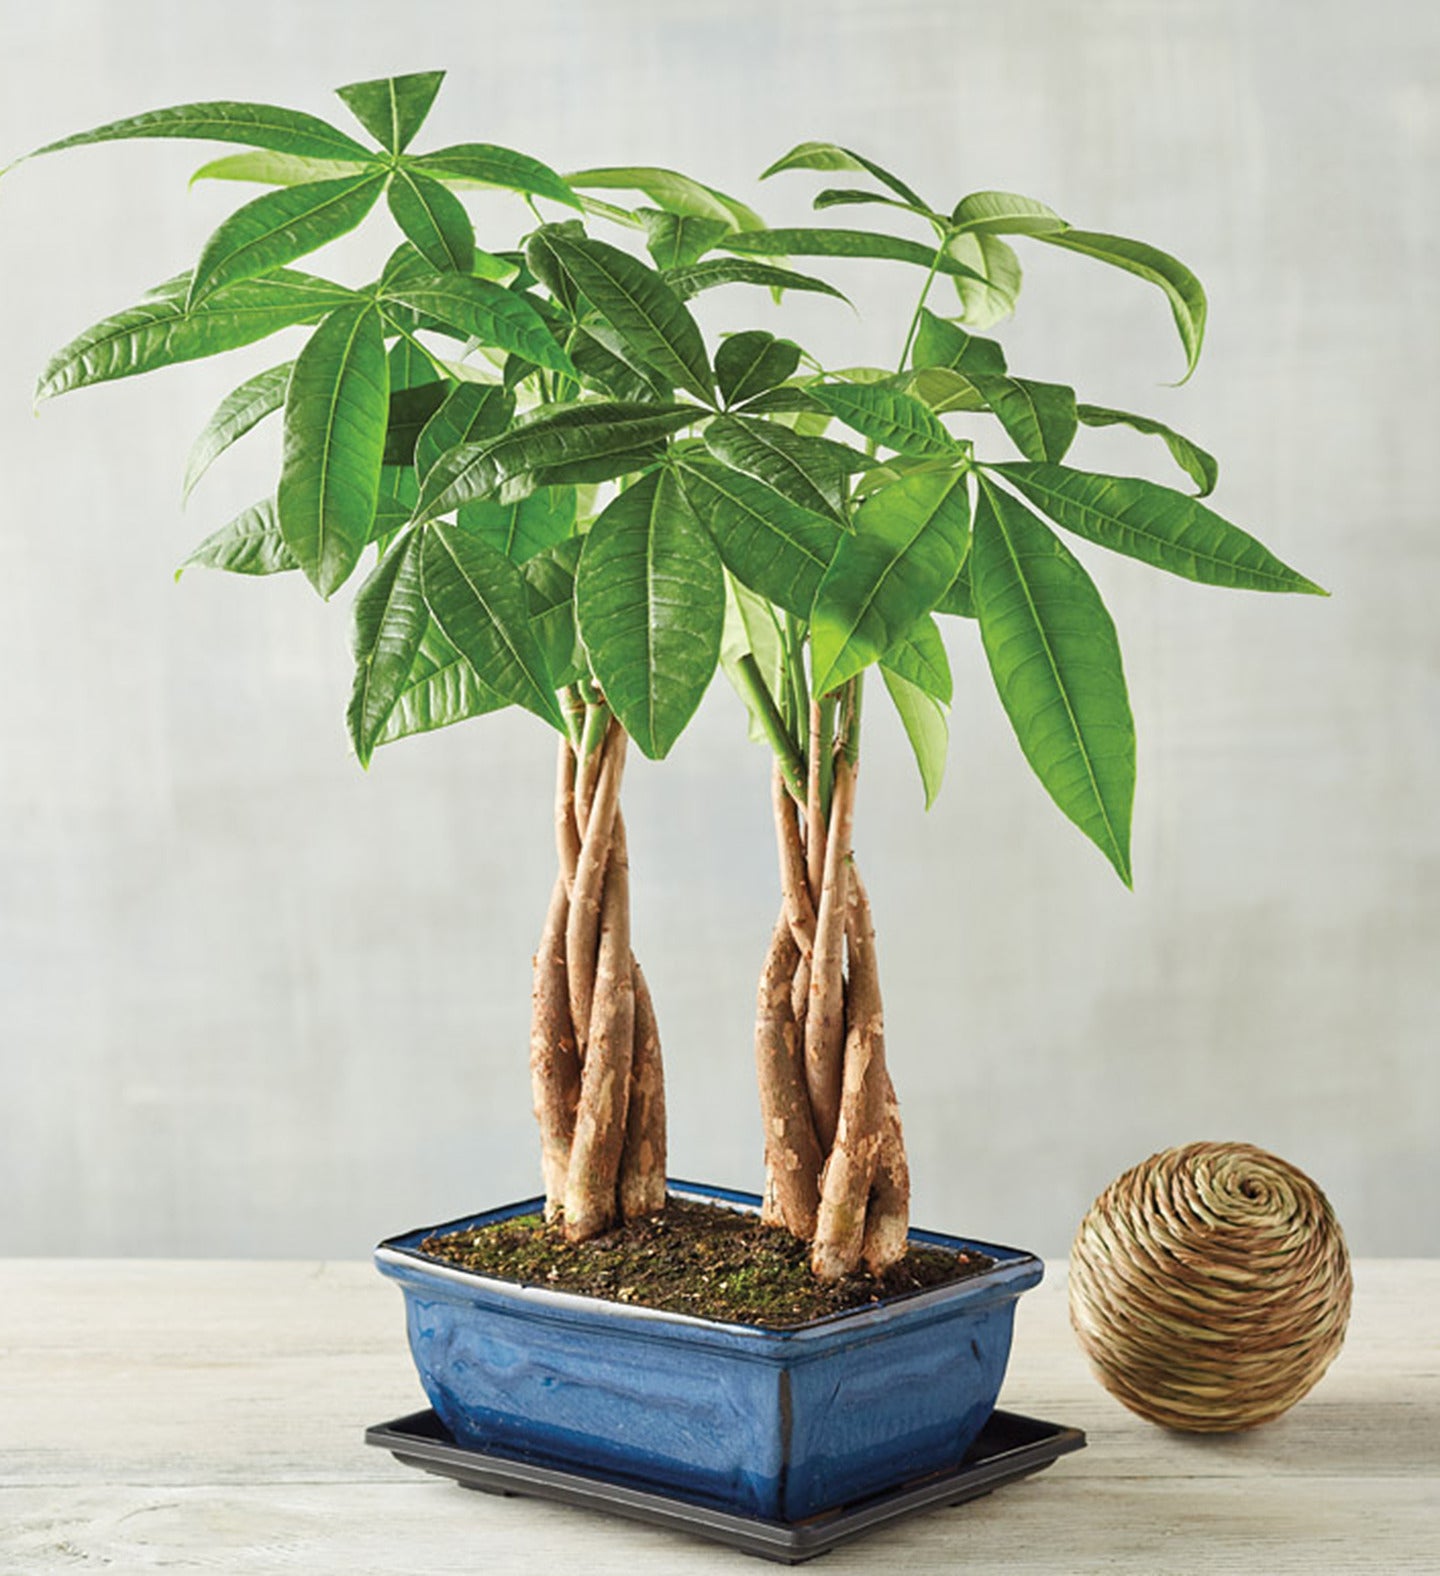 Plants Make Great Gifts | Lively Root